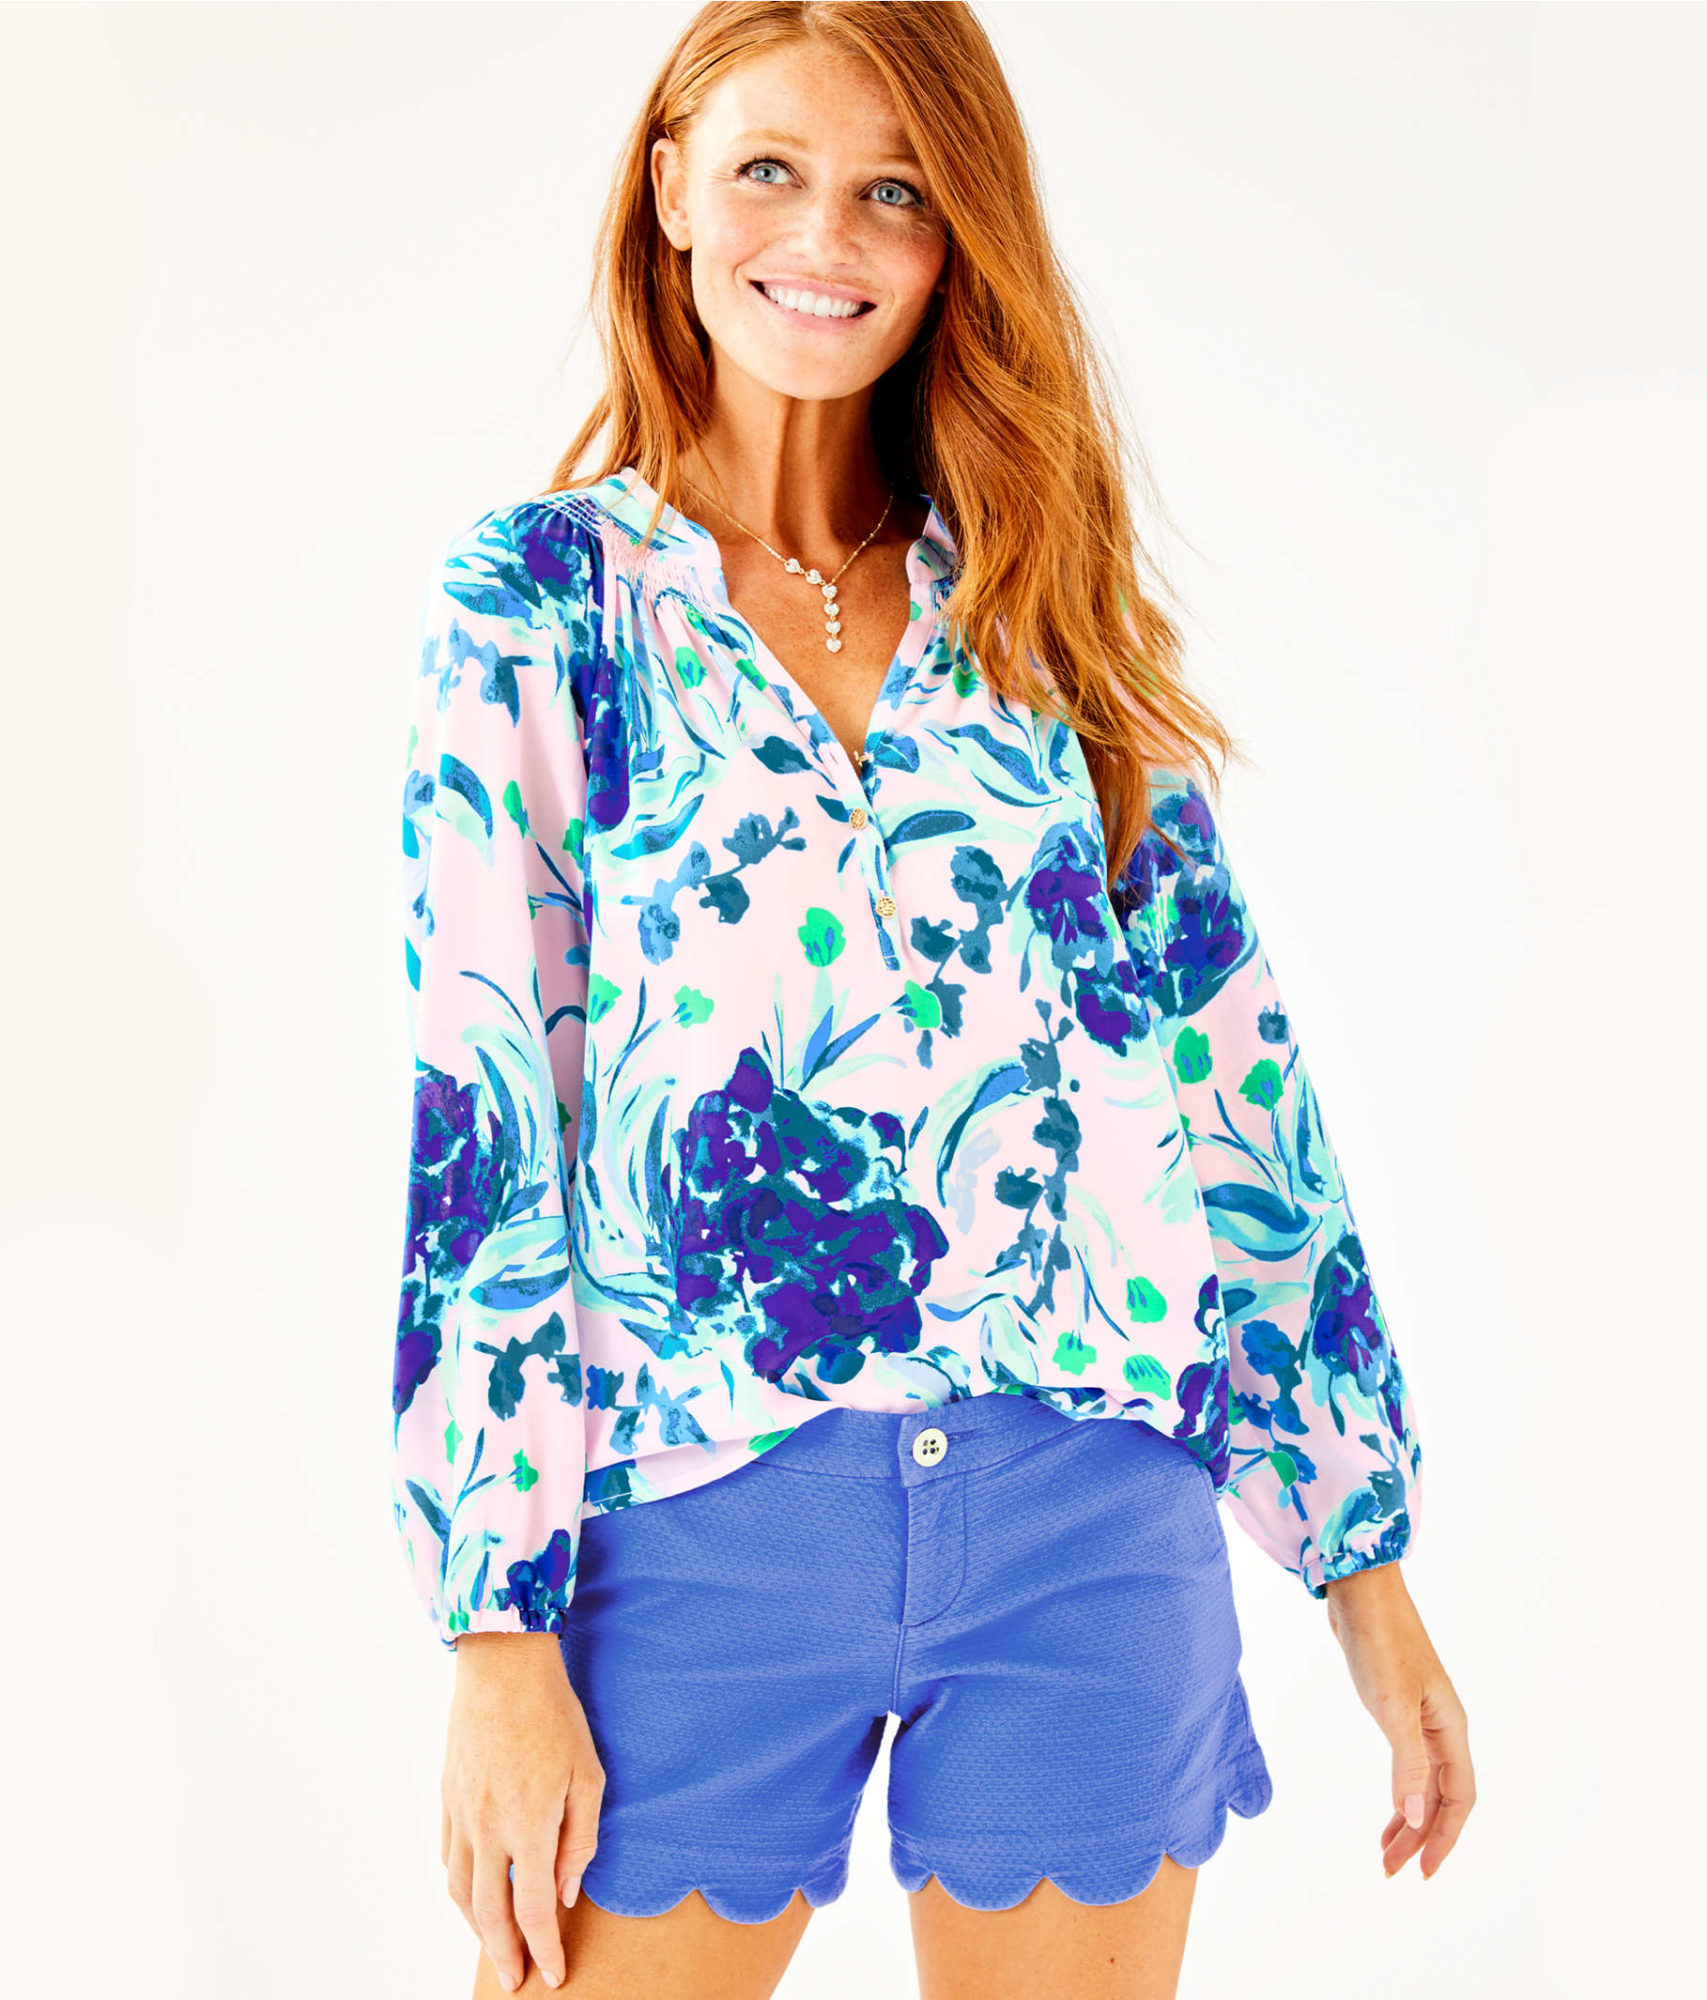 Lilly Pulitzer After Party Sale Dates September 2019 - Katie's Bliss